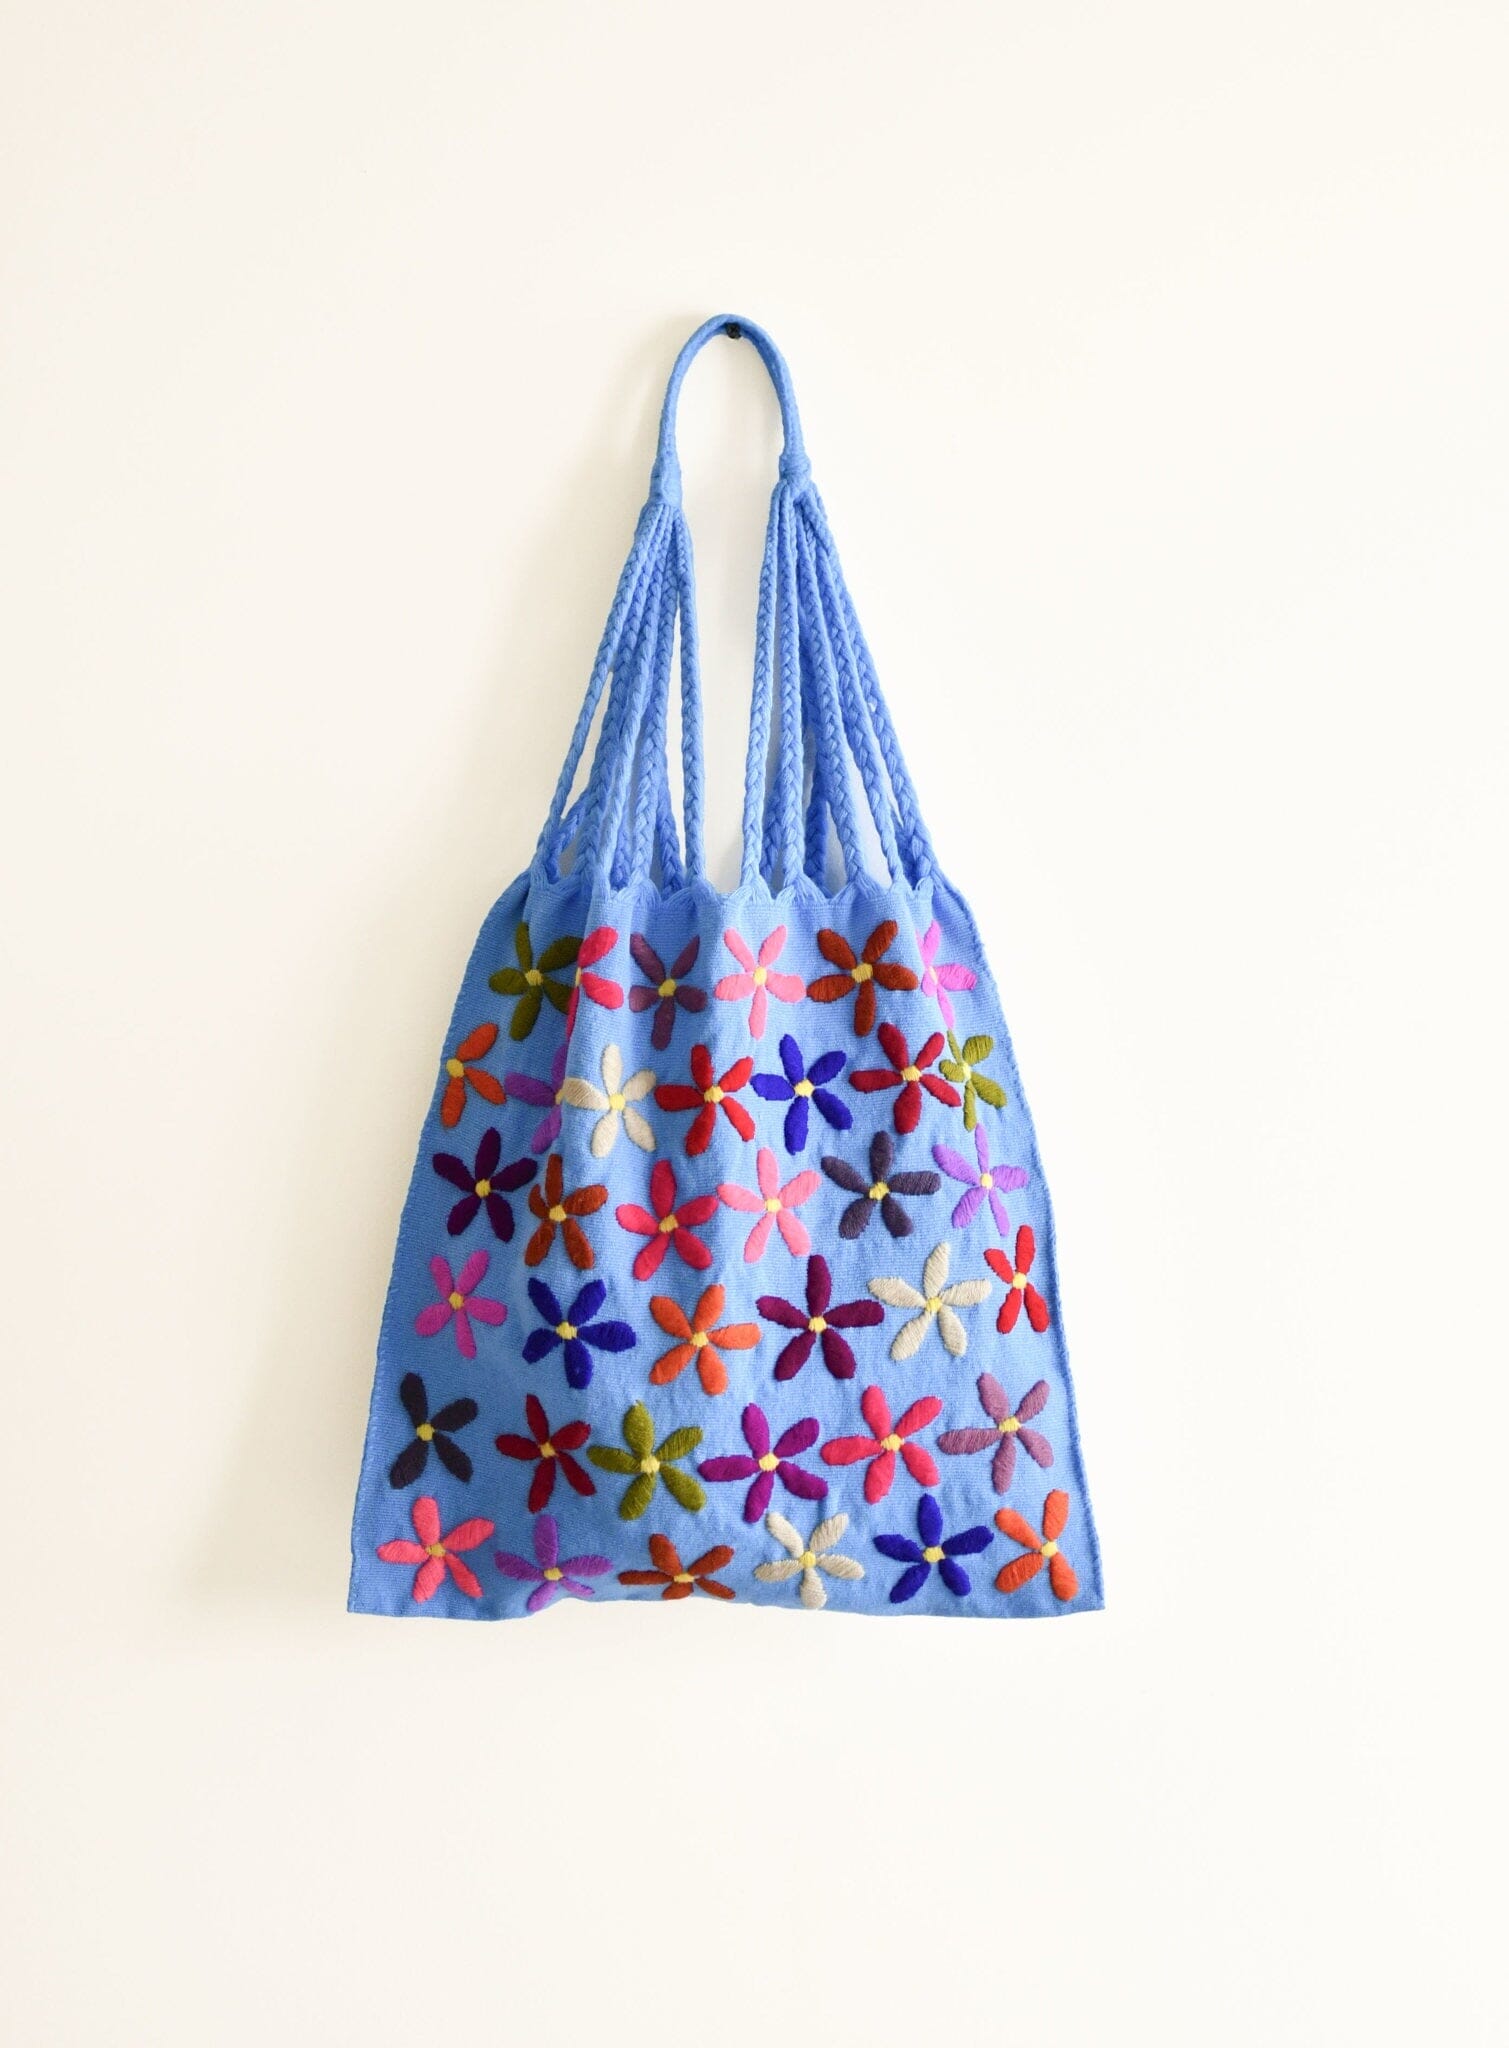 Child's Play Tote Bag Textile Bags Mother Sierra 